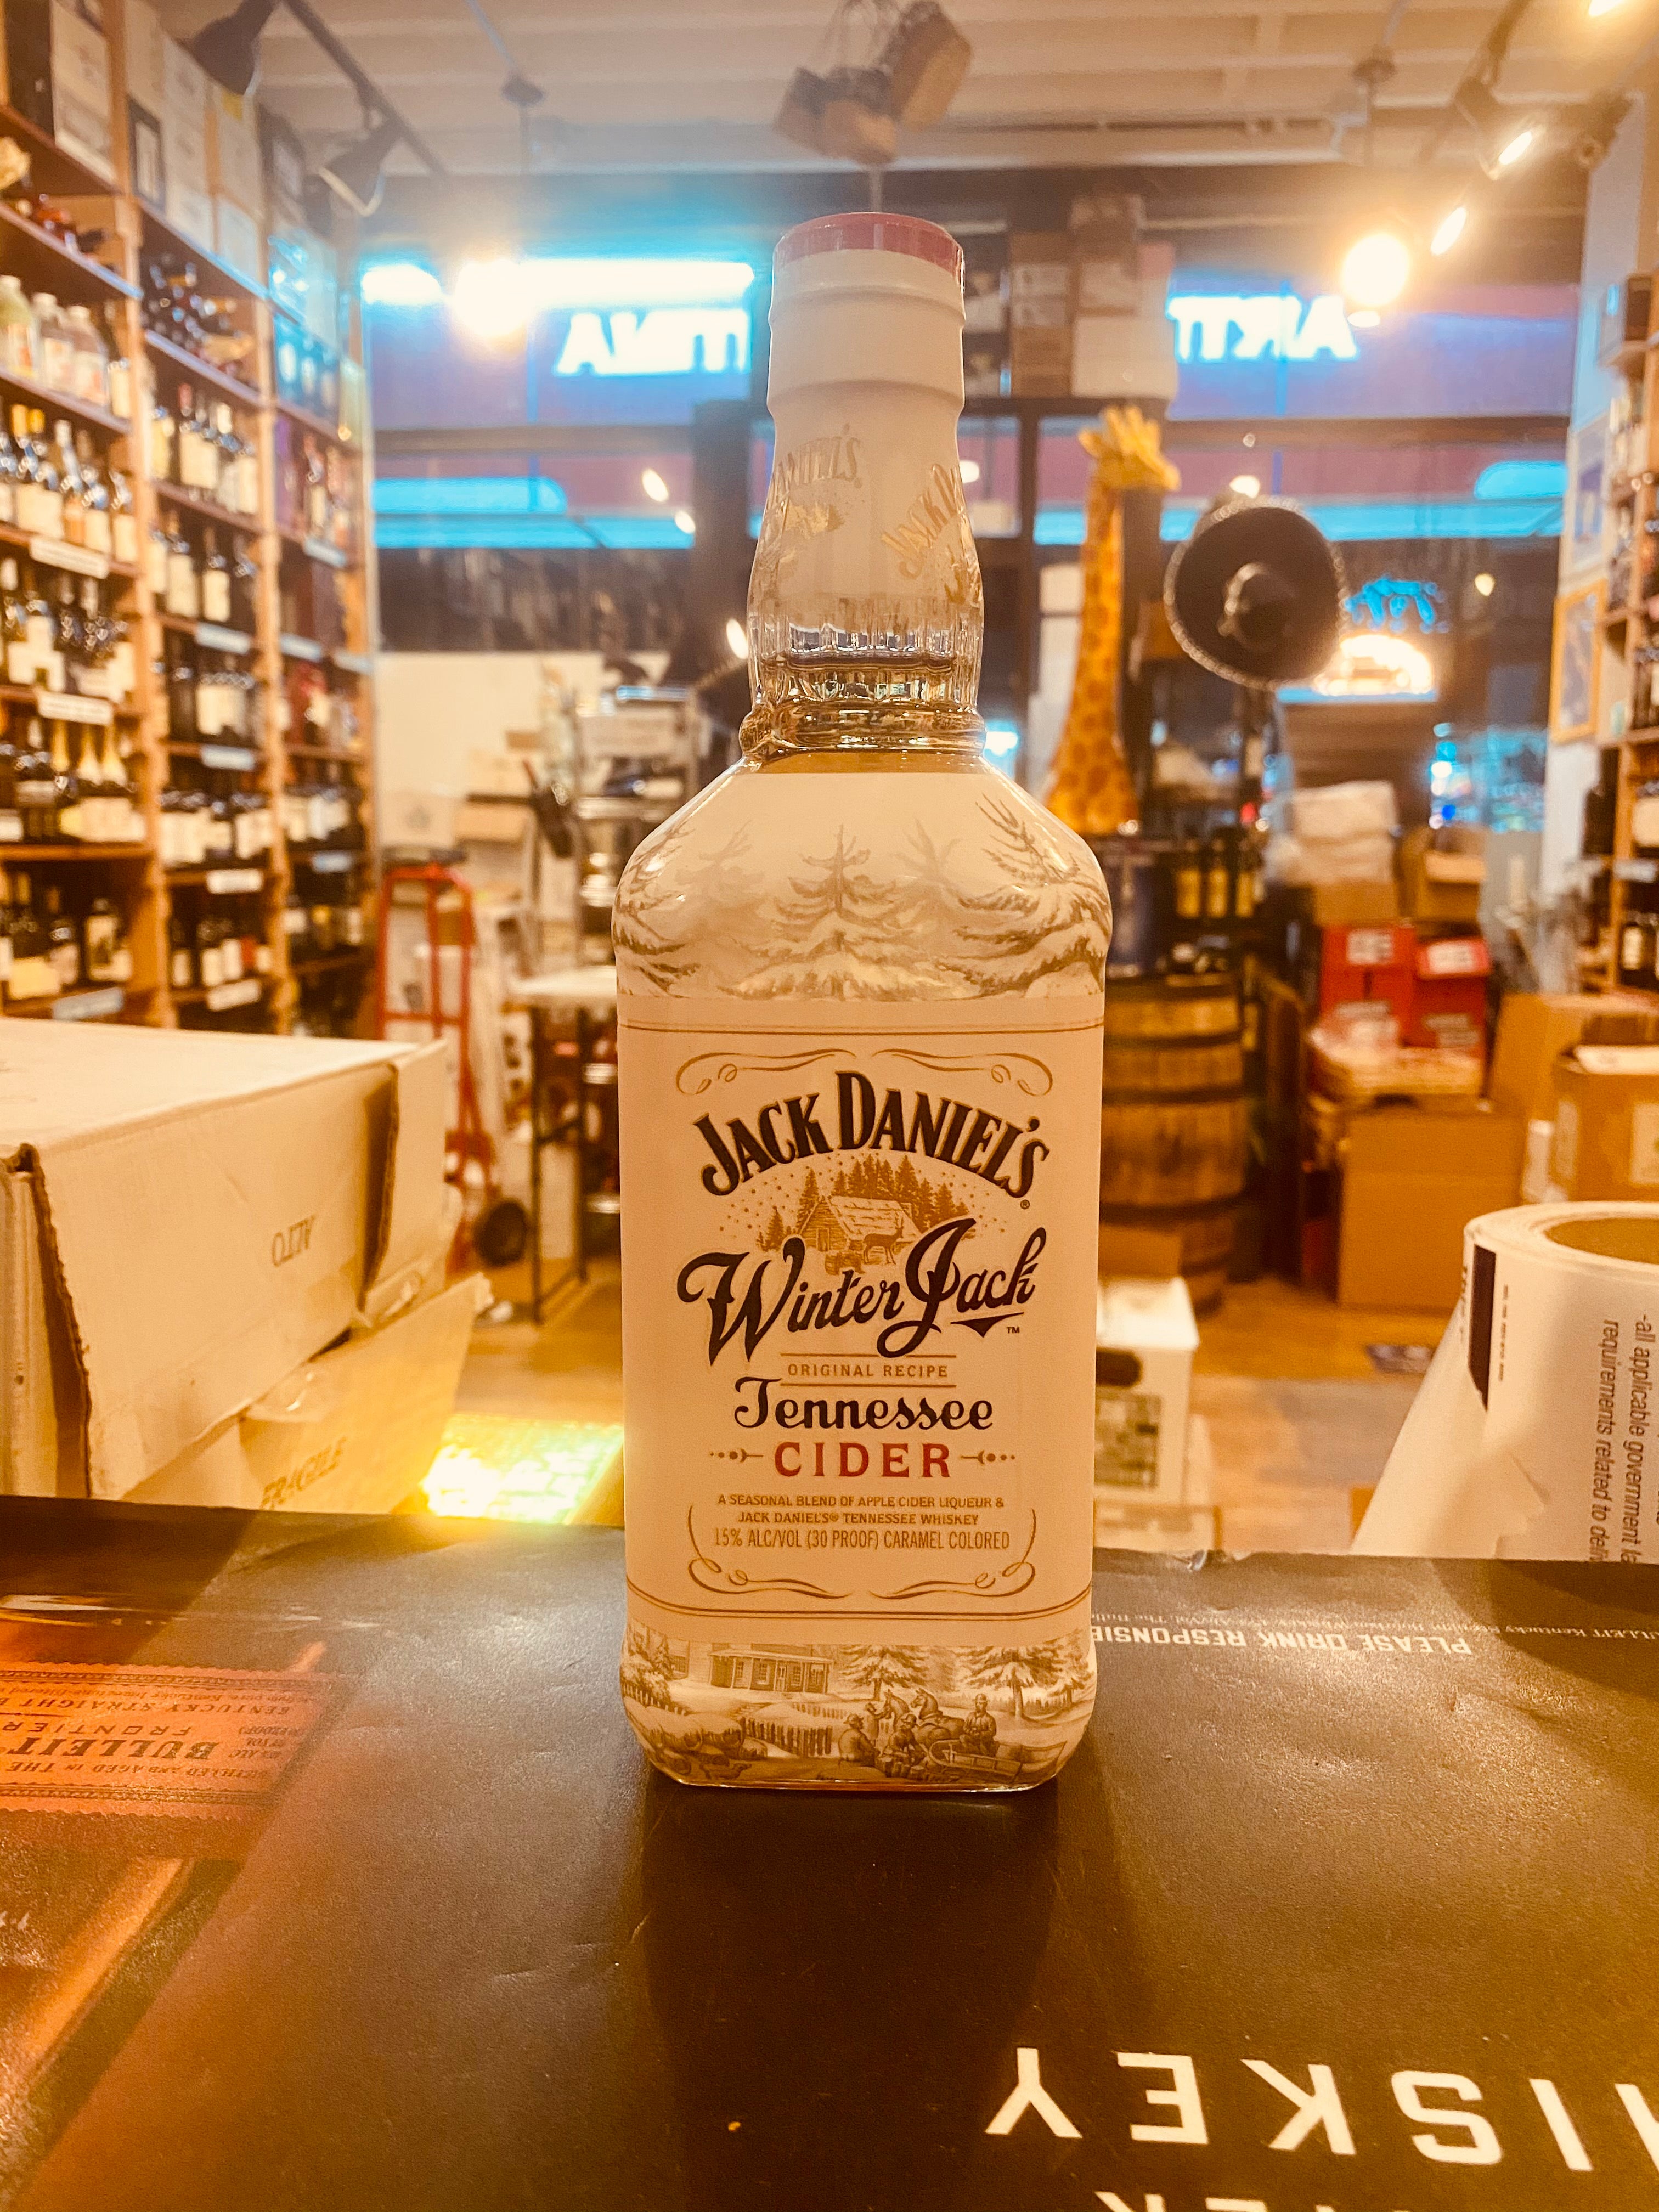 Jack Daniels Winter Jack Tennessee Cider 750mL a tall squared white glass bottle with black lettering